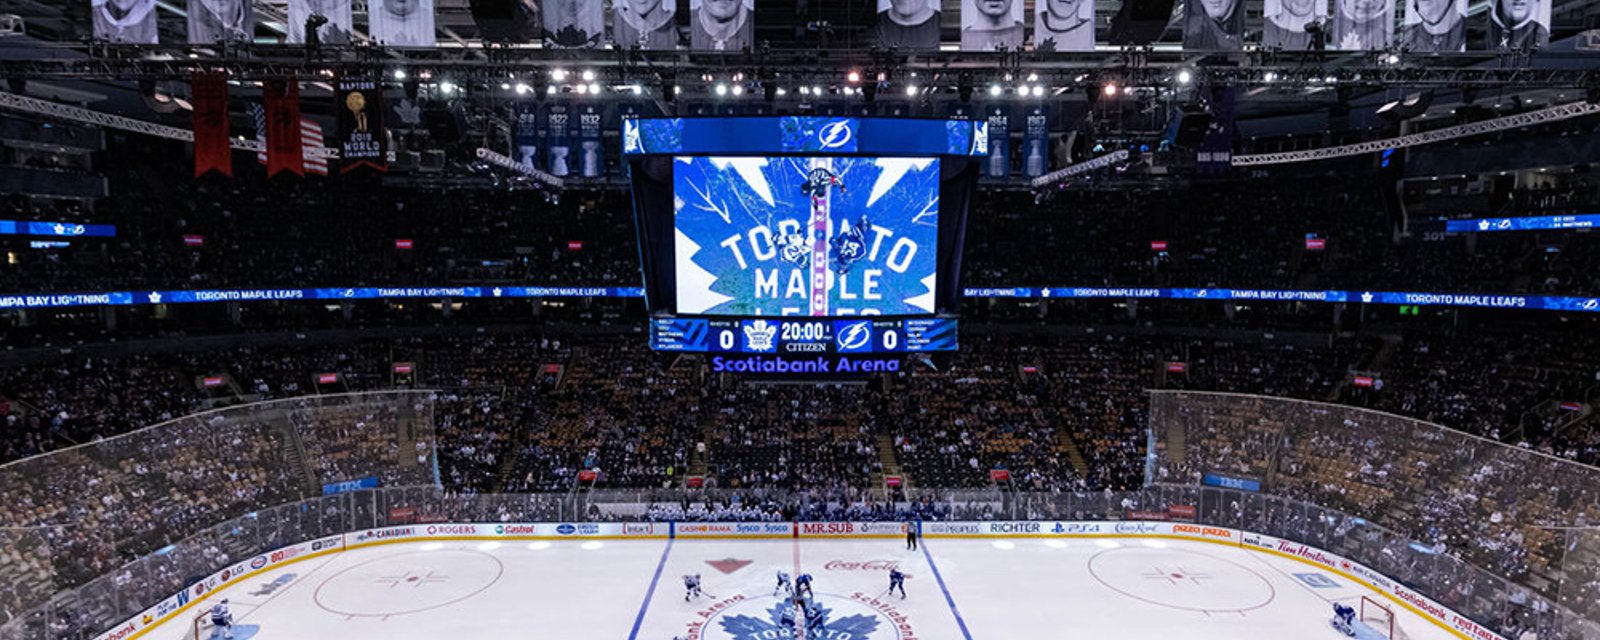 Toronto Maple Leafs announce pair of changes to their organizational structure​